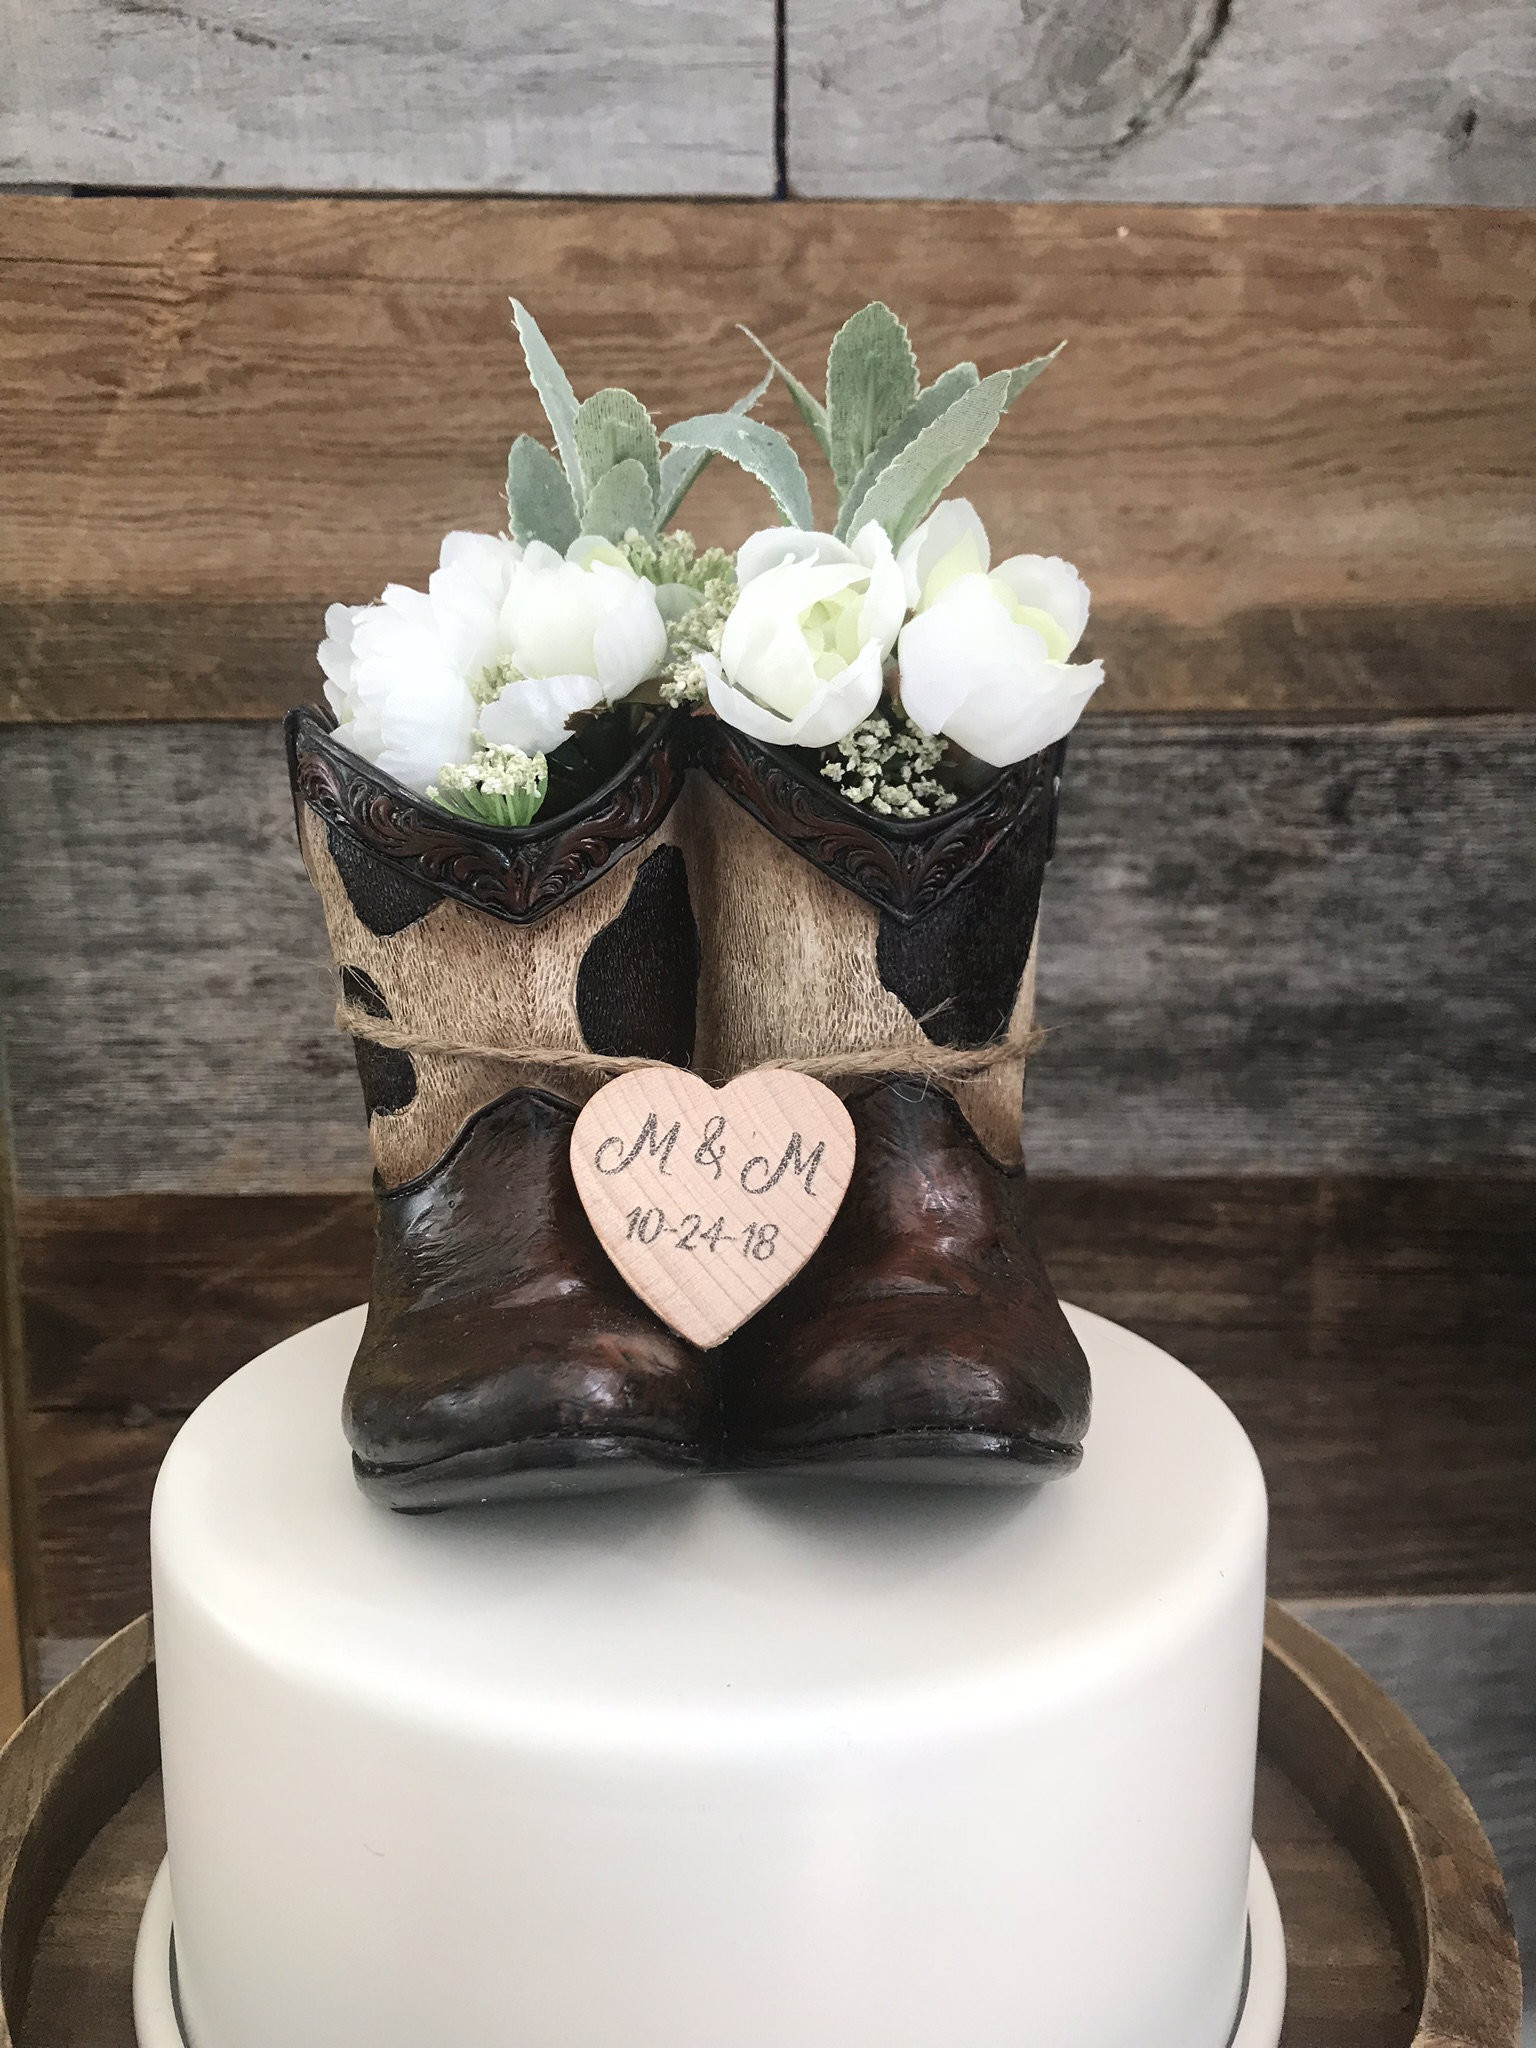 Country Wedding Cake Toppers
 Rustic Wedding Cake Toppers Cowboy Wedding Cake Topper